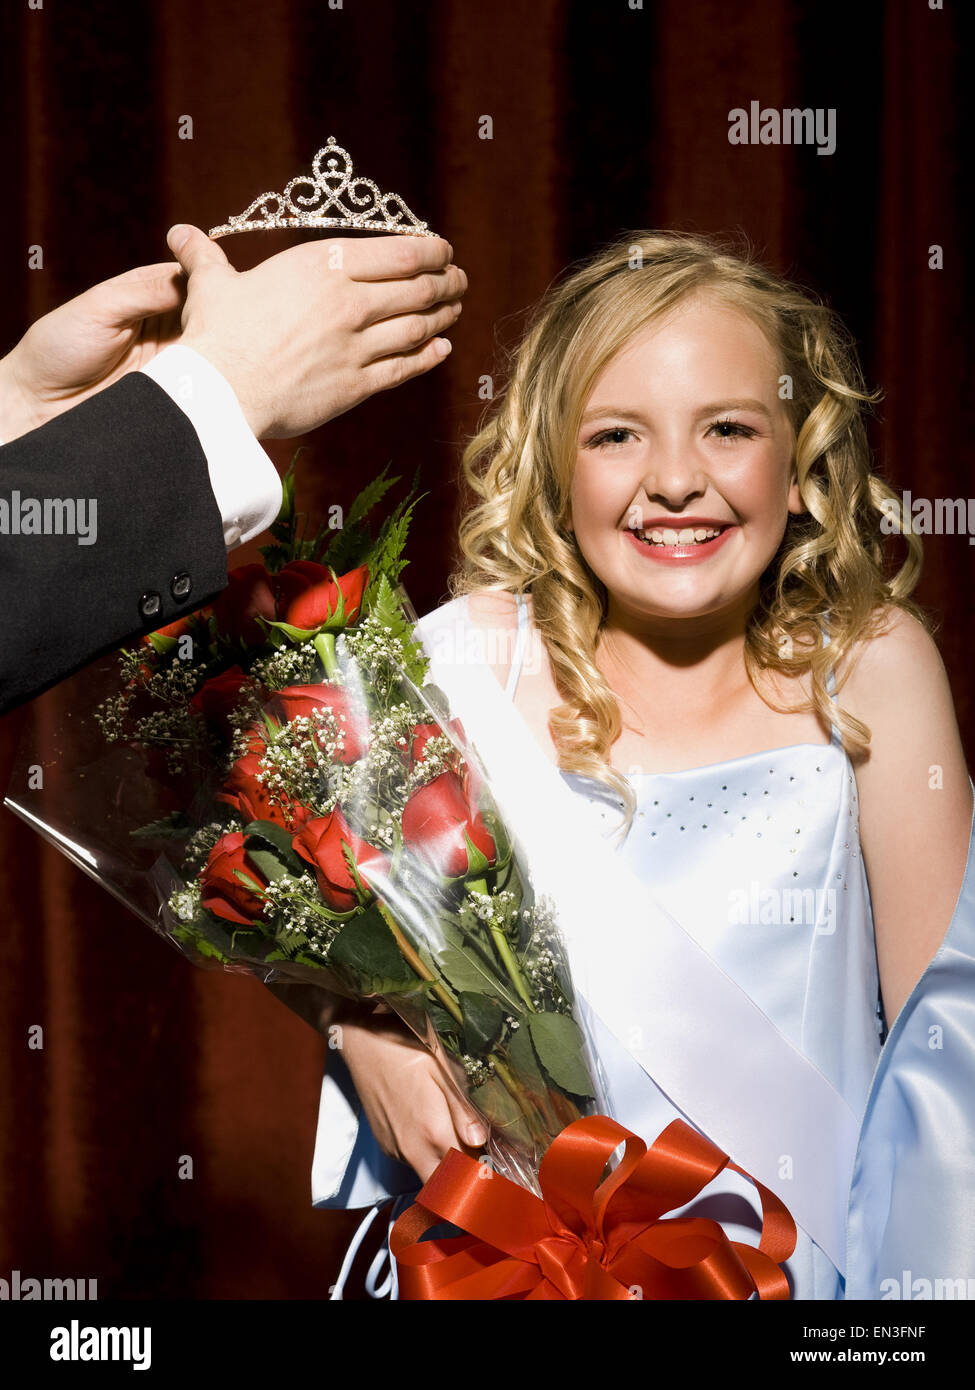 Girl holding red roses being crowned with tiara smiling Stock Photo